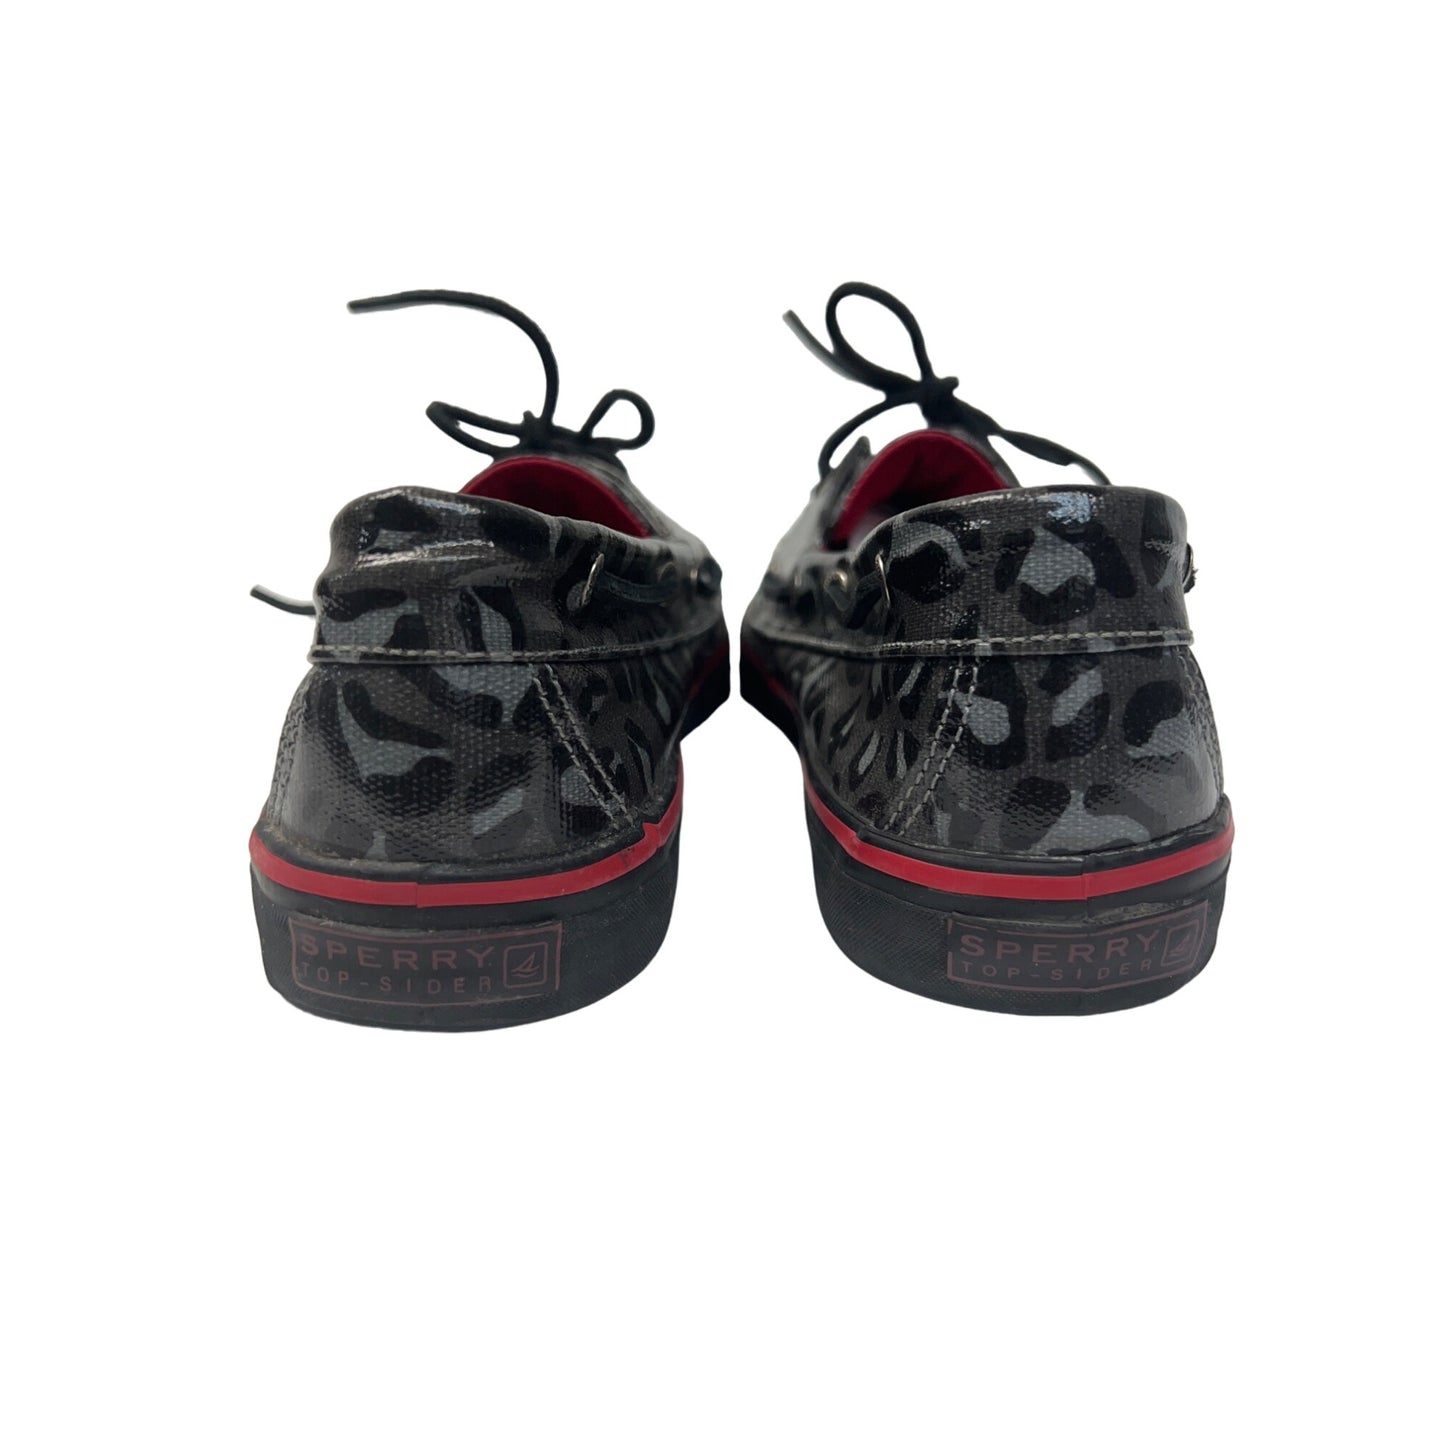 Sperry Topsider Black Gray Leopard Print Boat Shoes